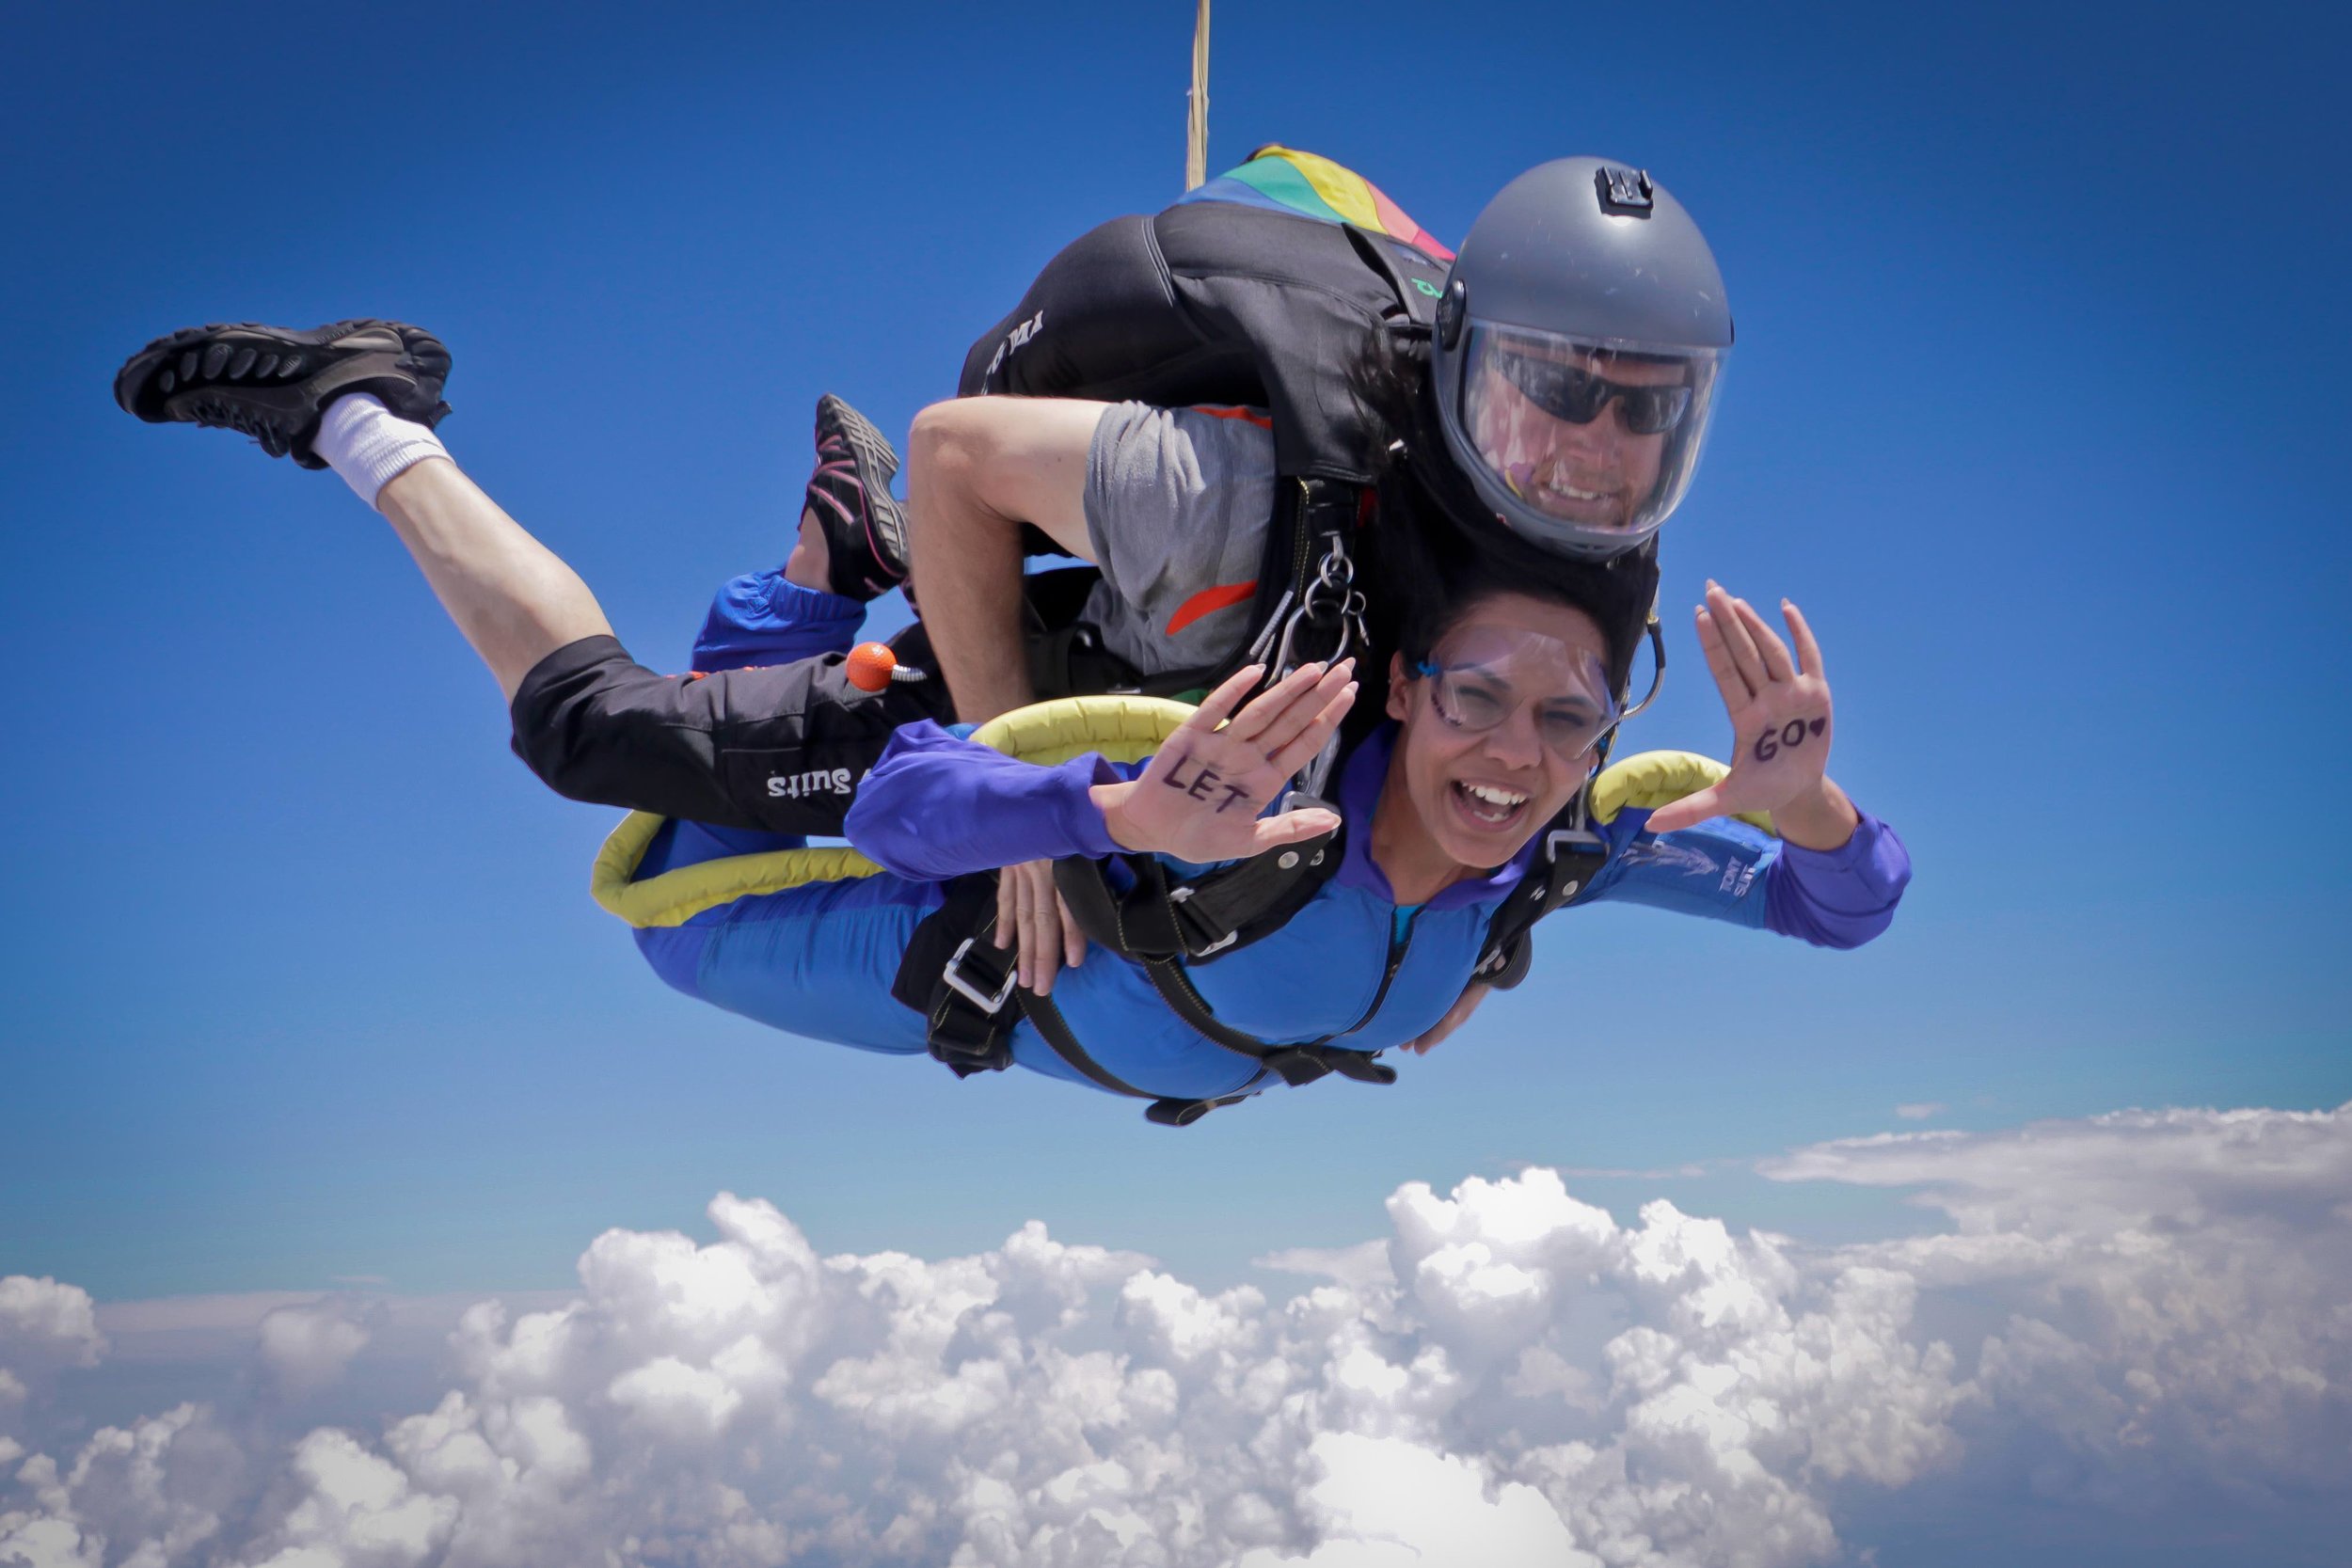 Life and skydive philosophy